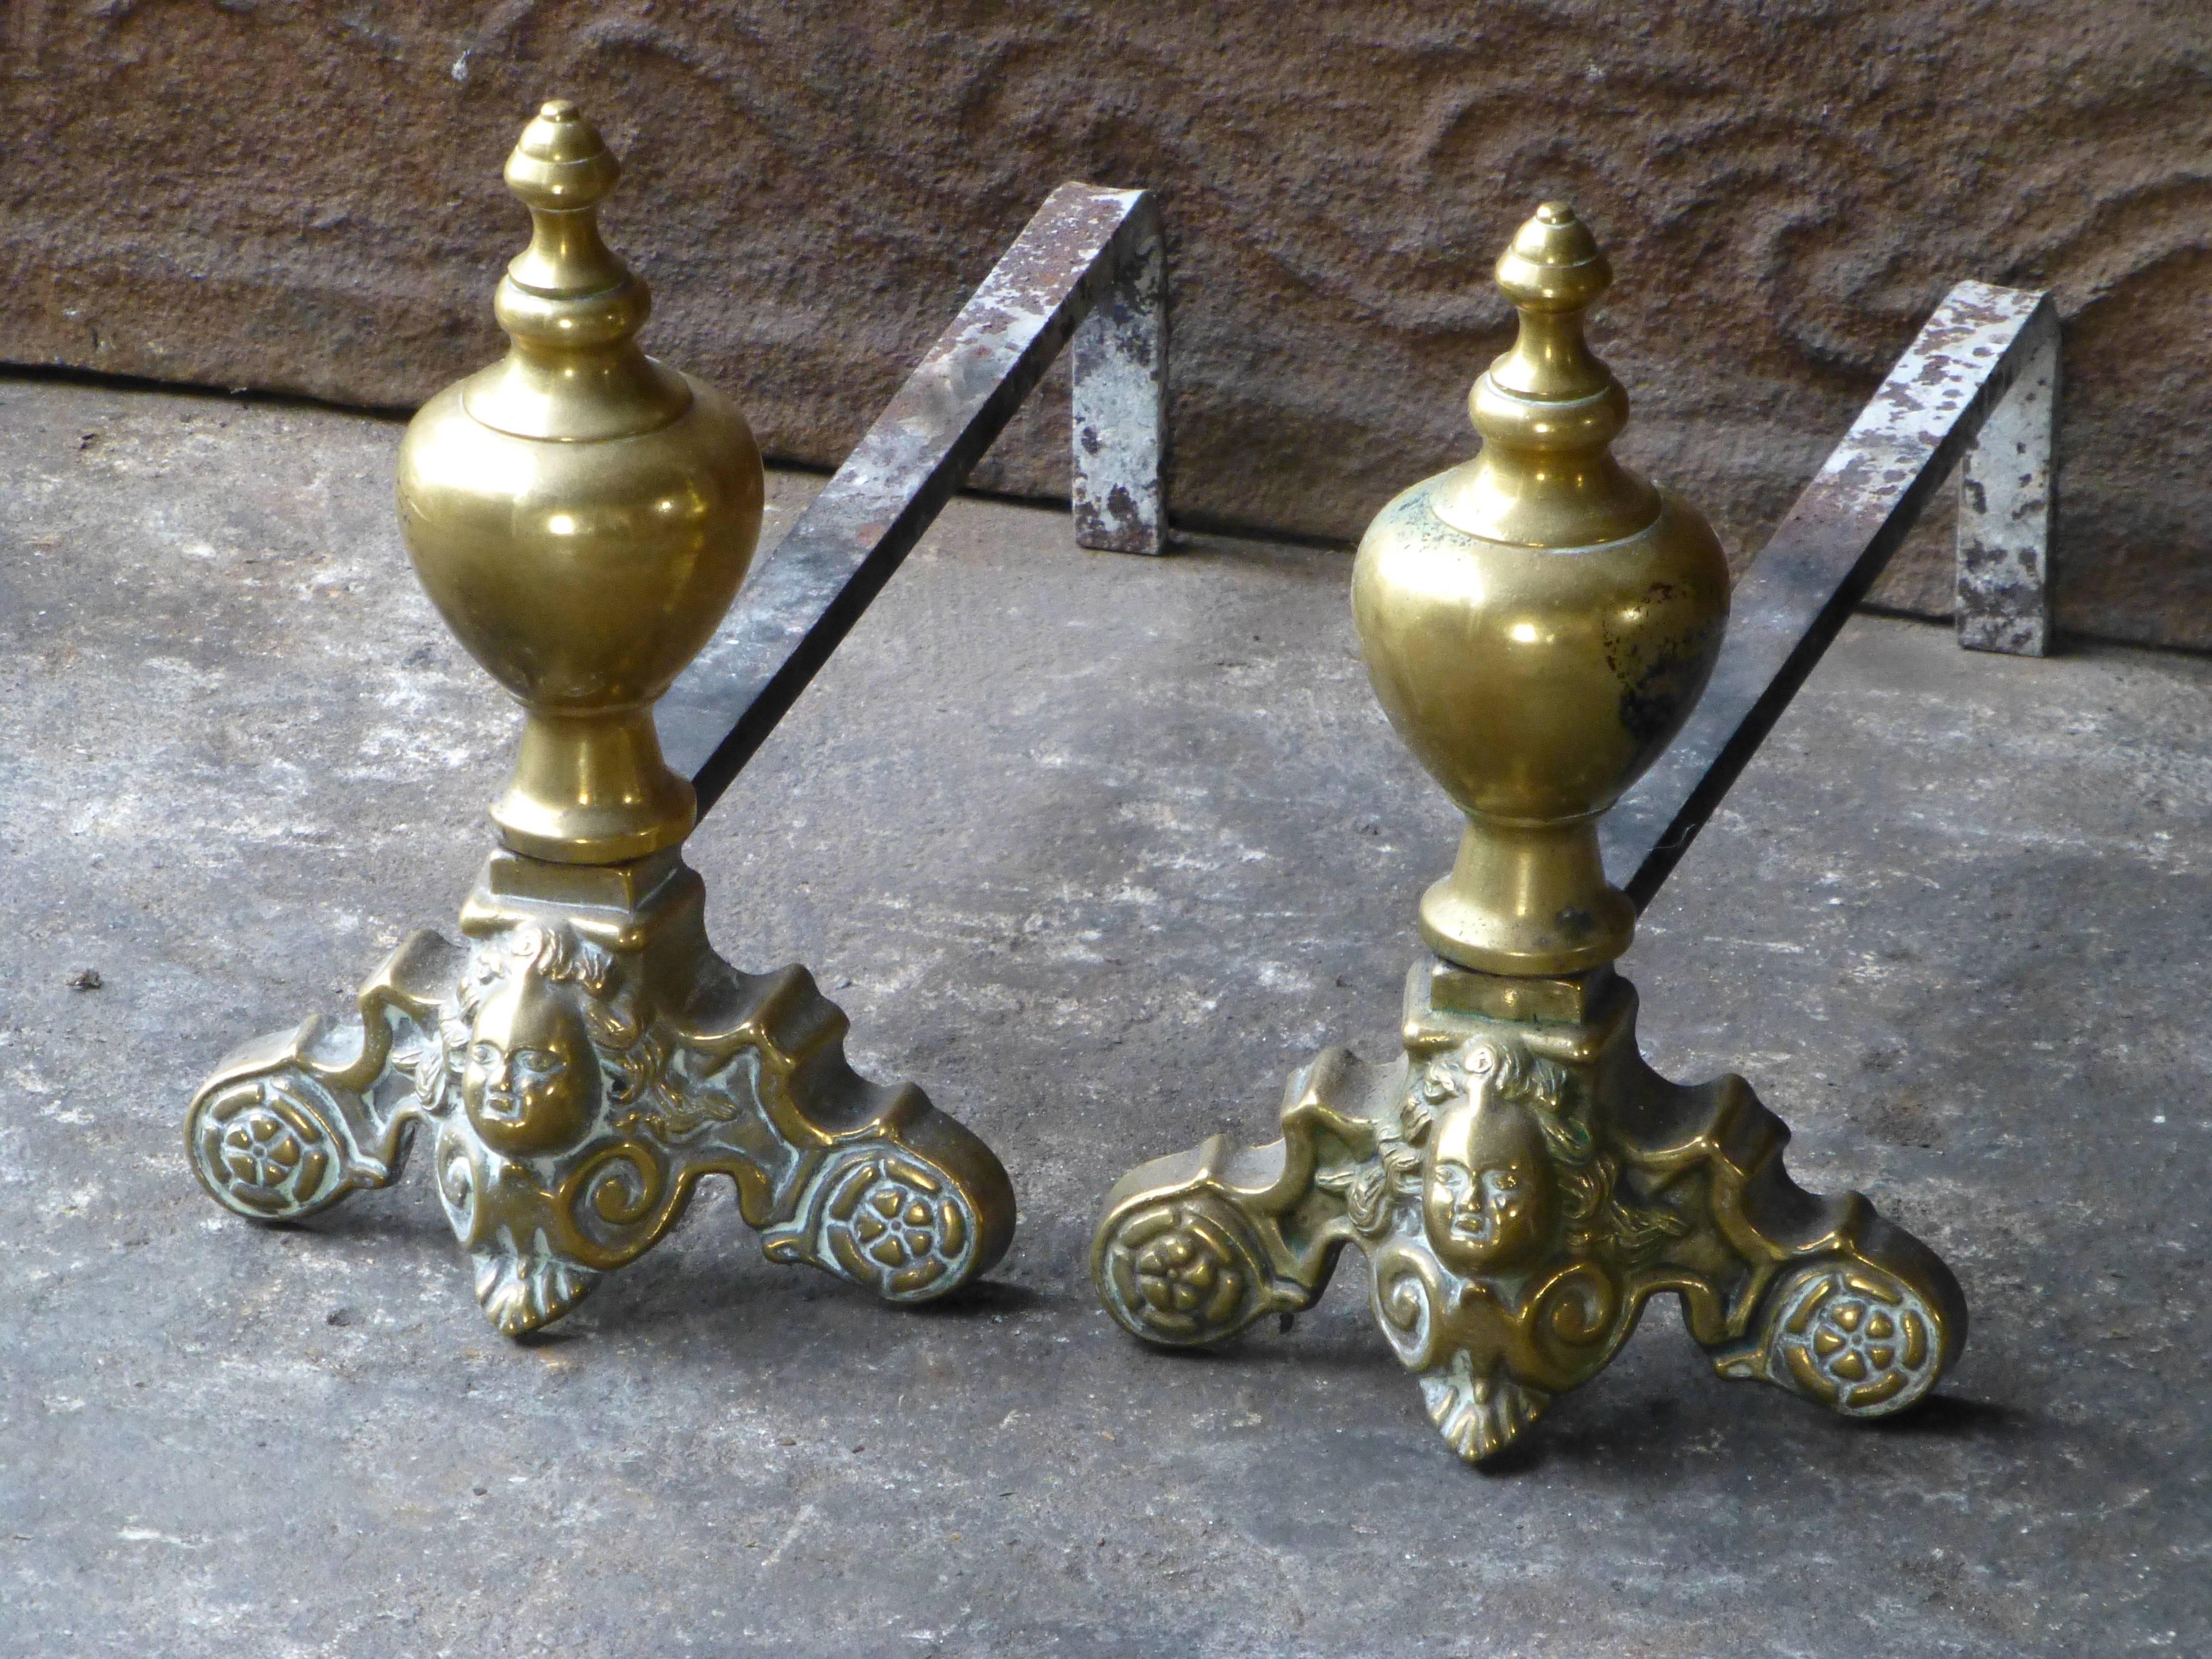 Fine pair of Louis XIV style andirons.

We always have 350+ pair of antique andirons - fire dogs in stock that can be ordered on line. See our website for our current stock and prices.